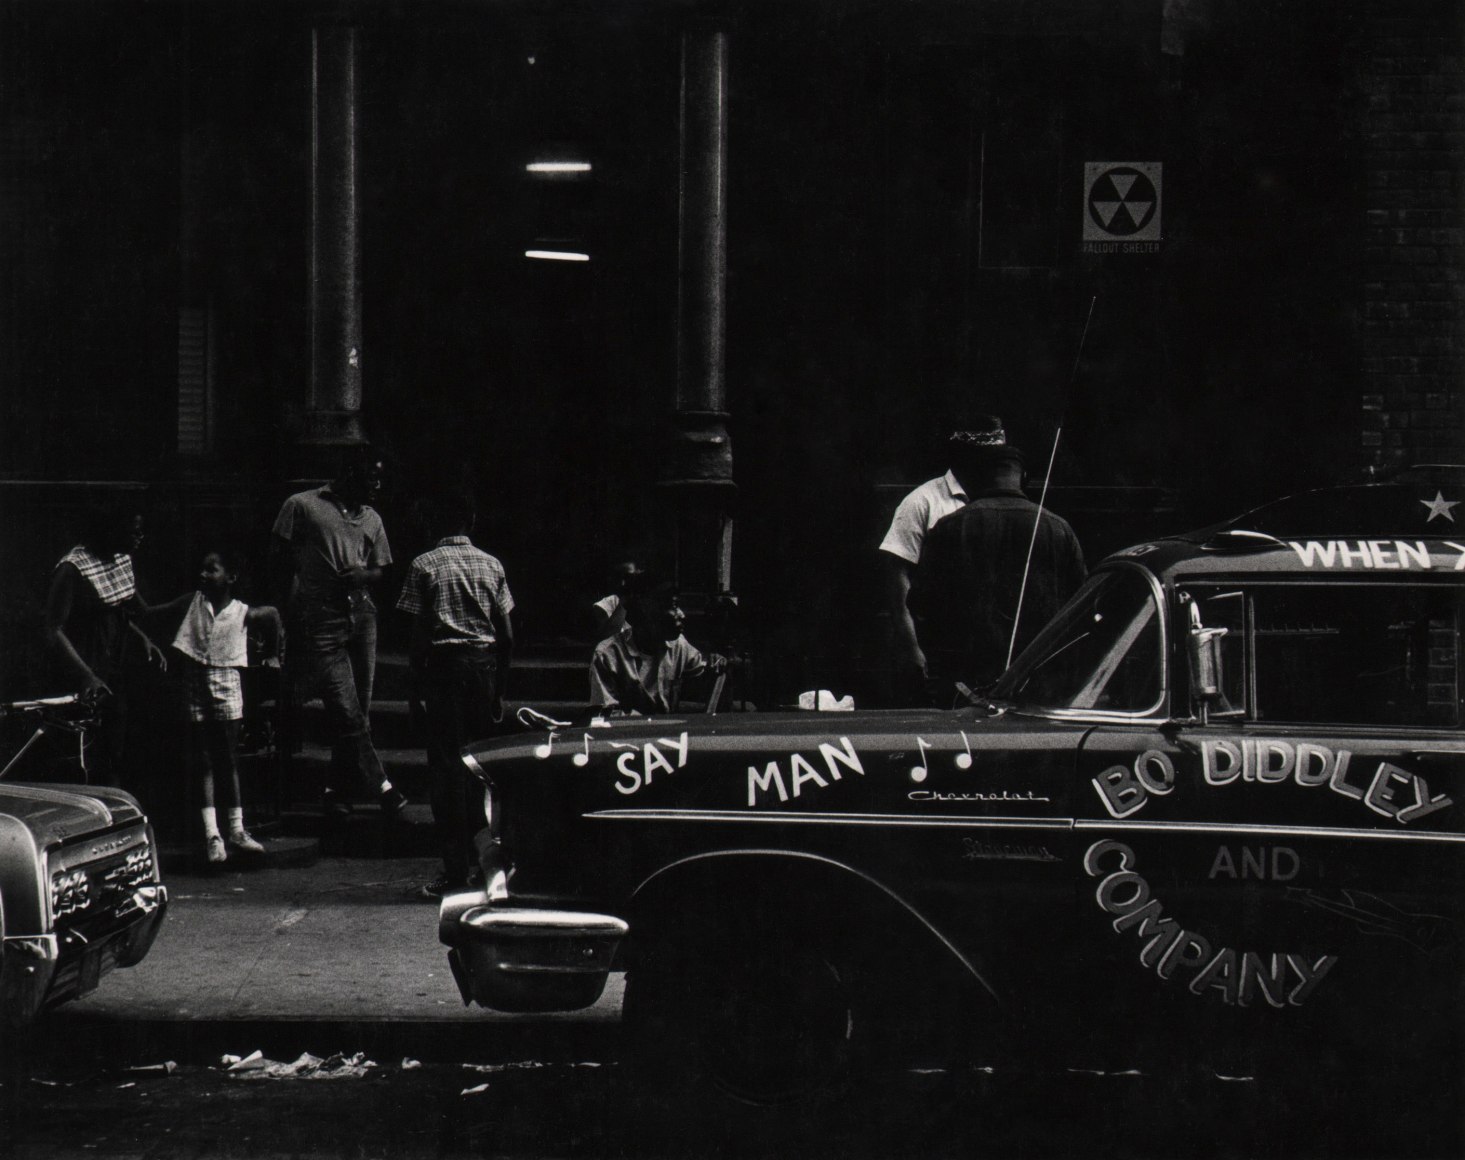 30. Beuford Smith, Say Man, Harlem, ​1969. A car parked on the street that reads &quot;Say Man&quot; and &quot;Bo Diddley and Company&quot;. Figures gathered on the sidewalk behind.